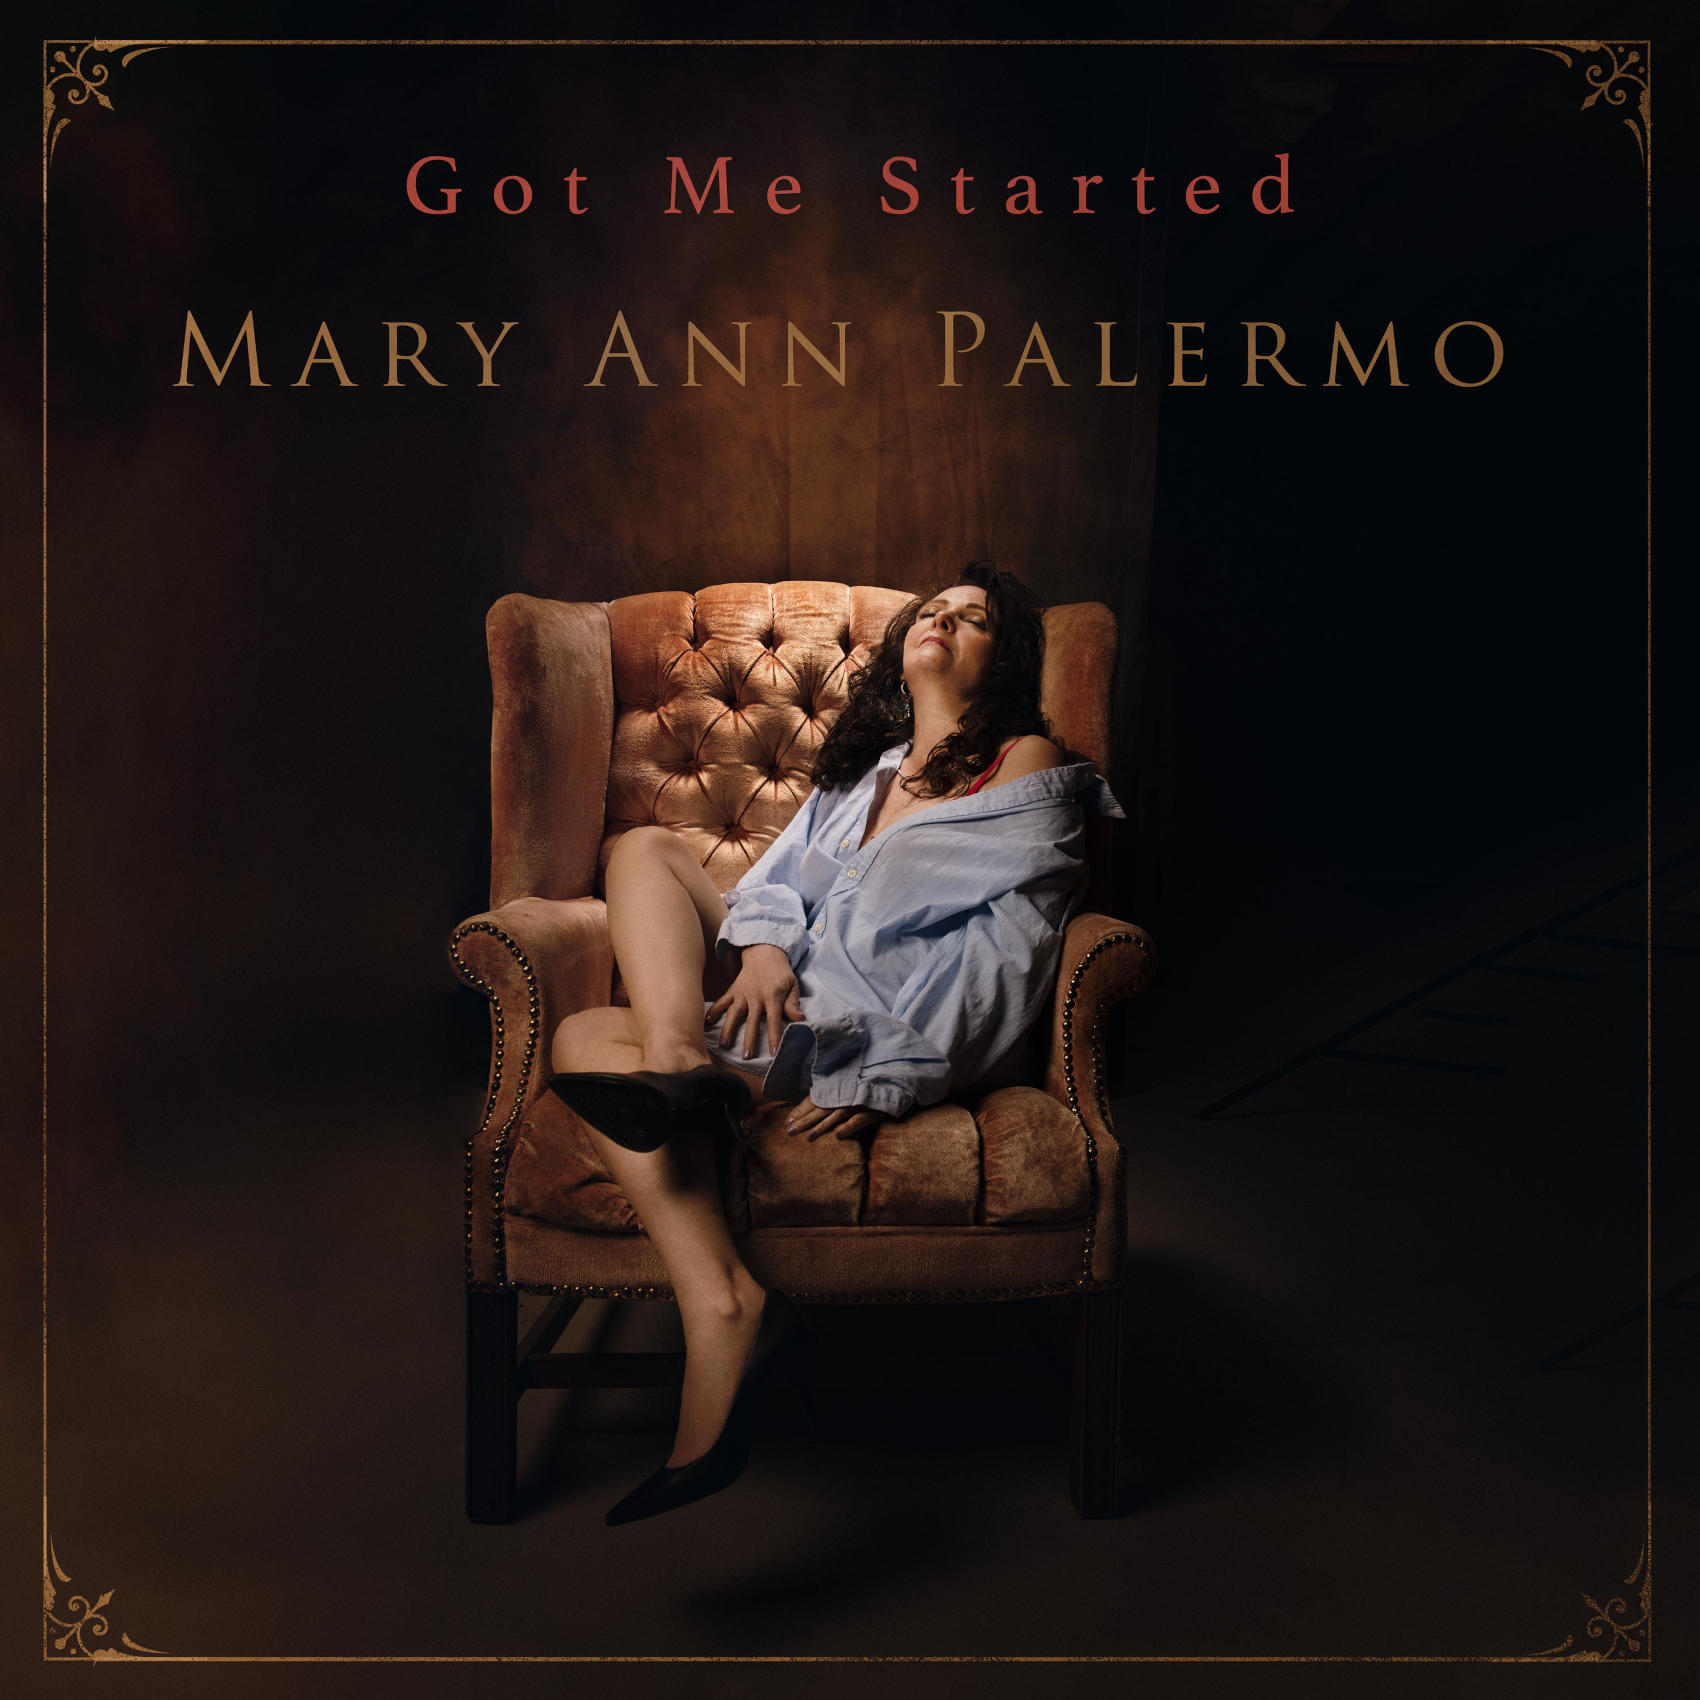 Singles Release, Got Me Started, Mary Ann Palermo